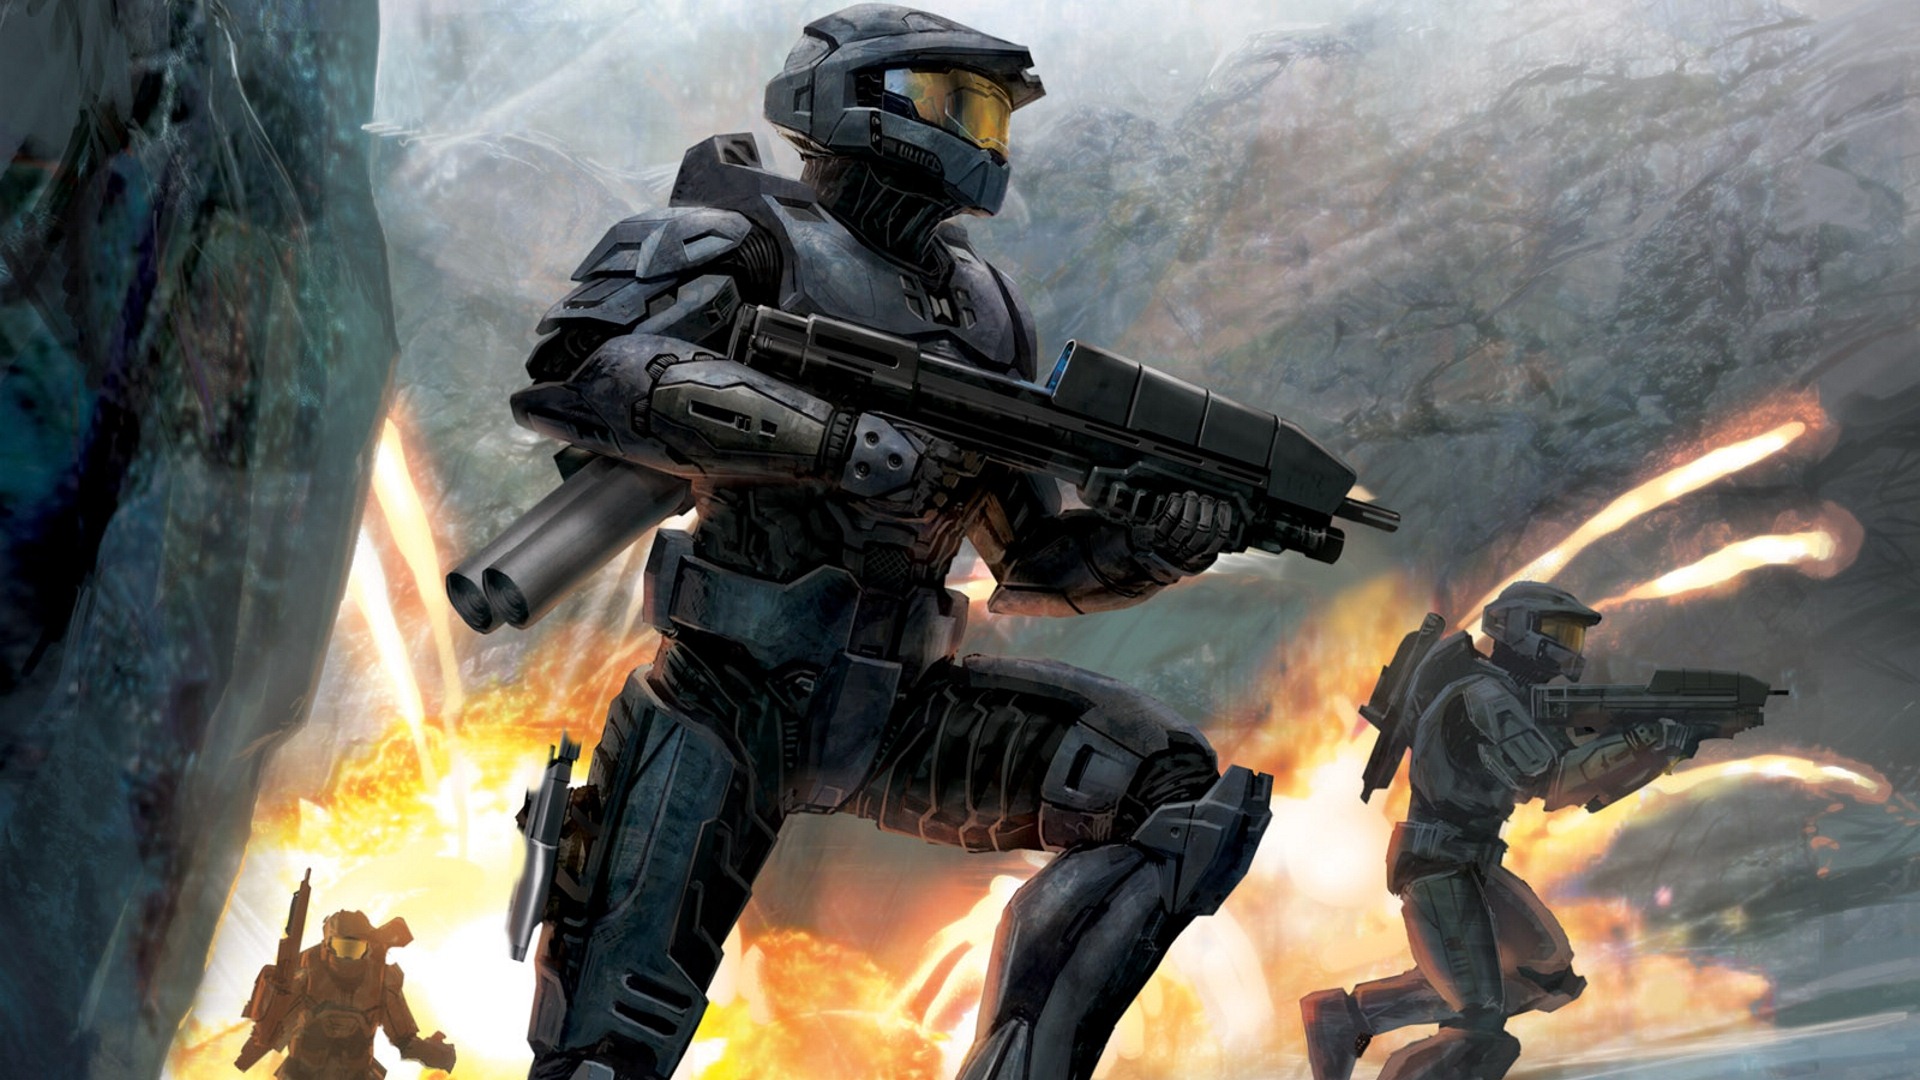 Halo game HD wallpapers #4 - 1920x1080